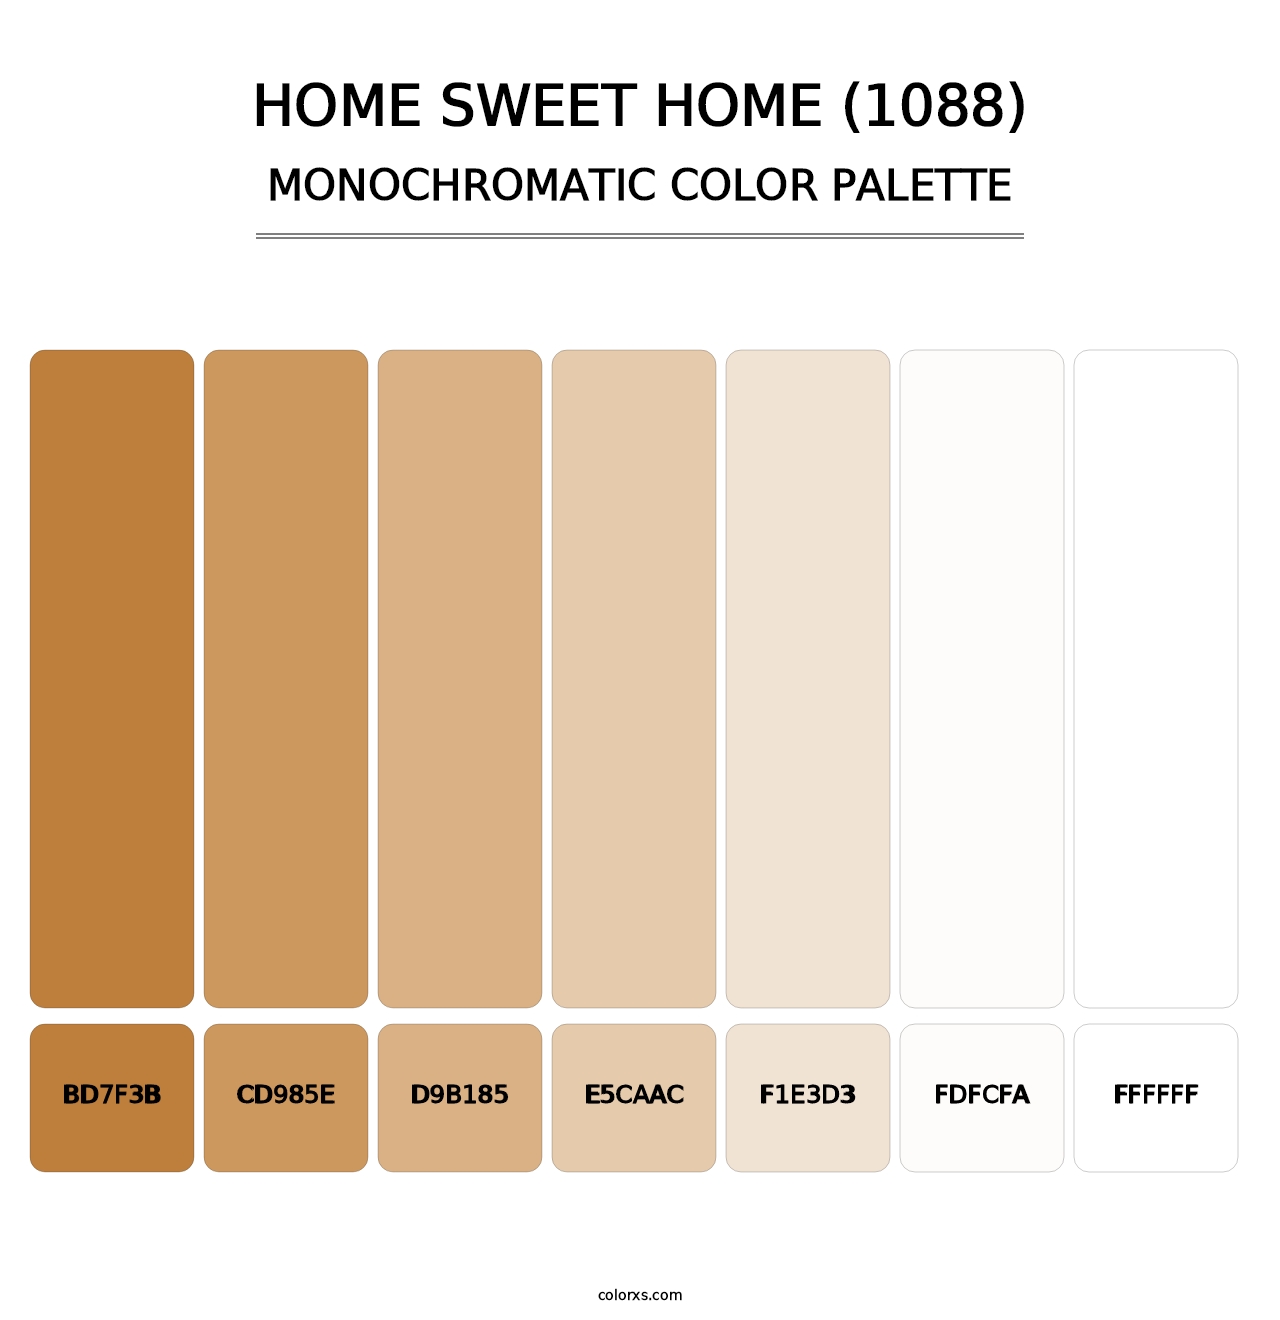 Home Sweet Home (1088) - Monochromatic Color Palette